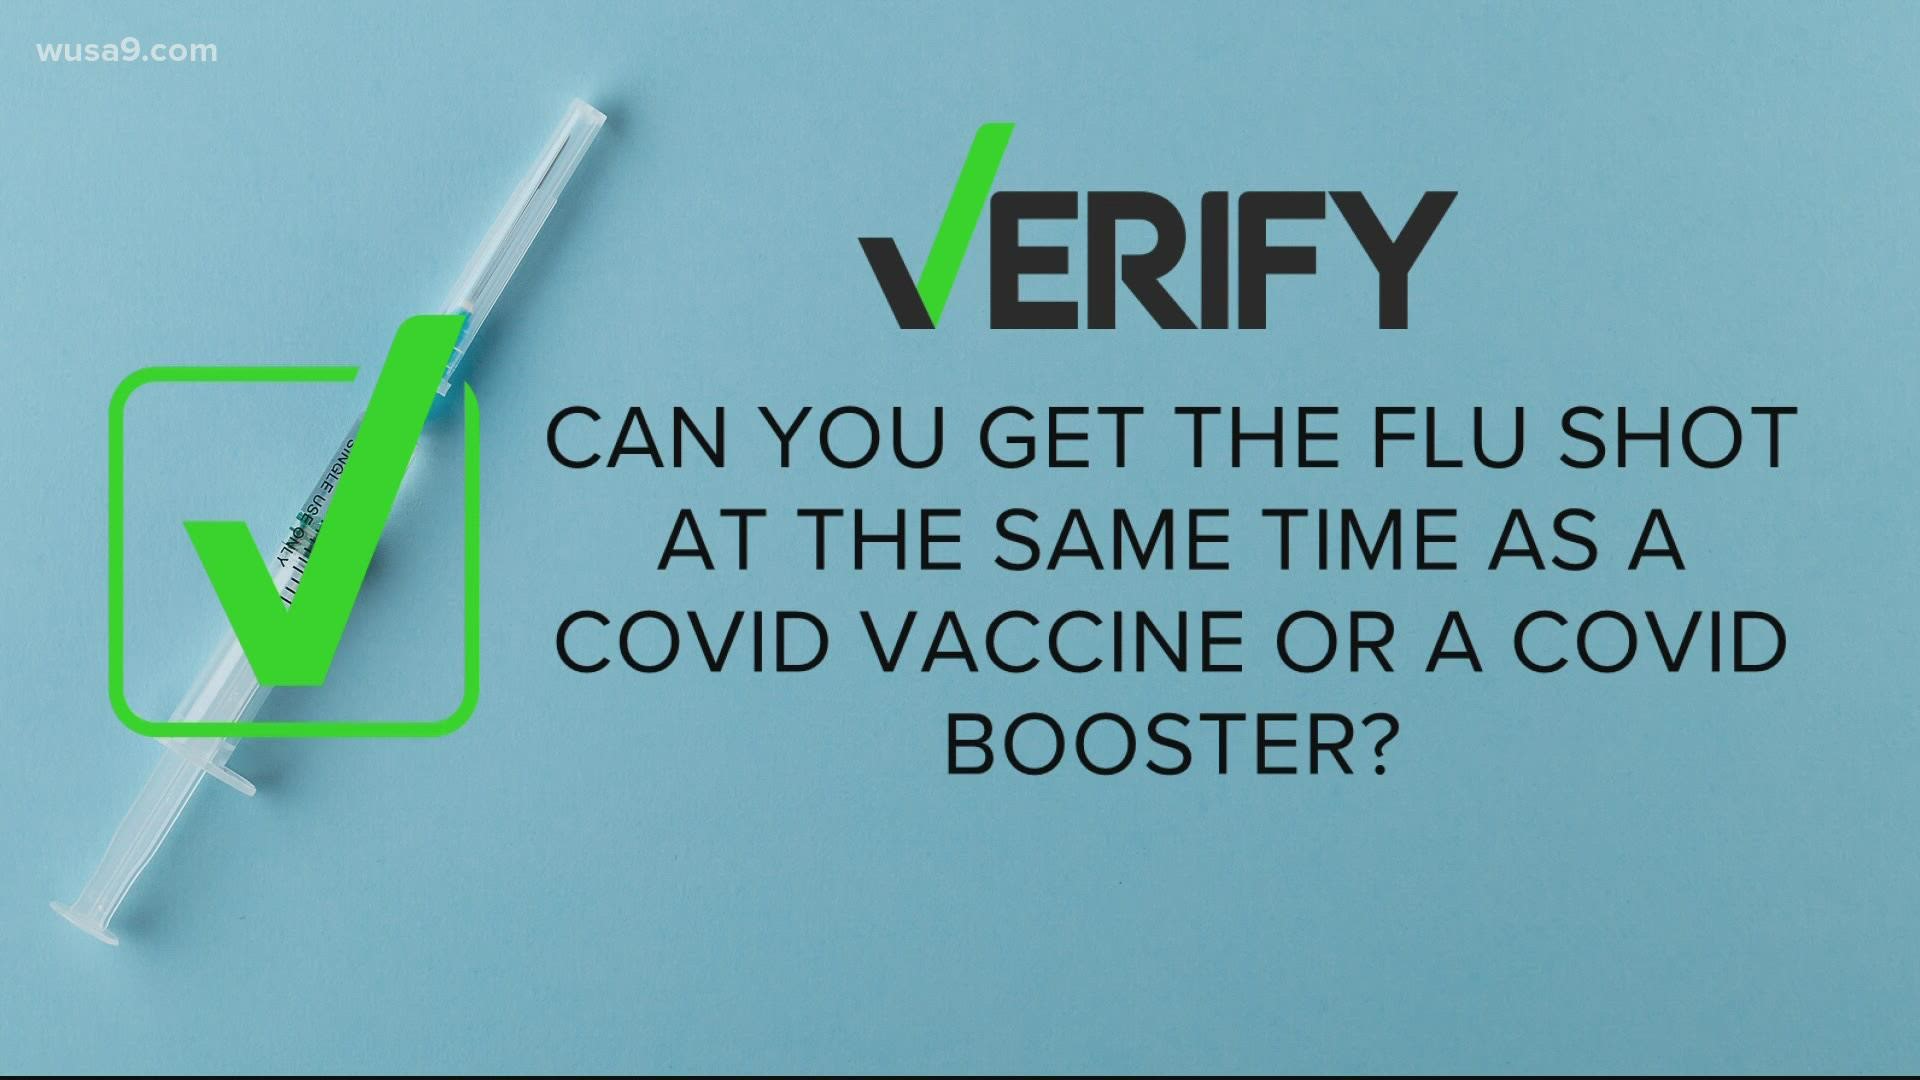 Our VERIFY experts say its perfectly fine to get a COVID shot or booster together with other routine vaccines, like influenza